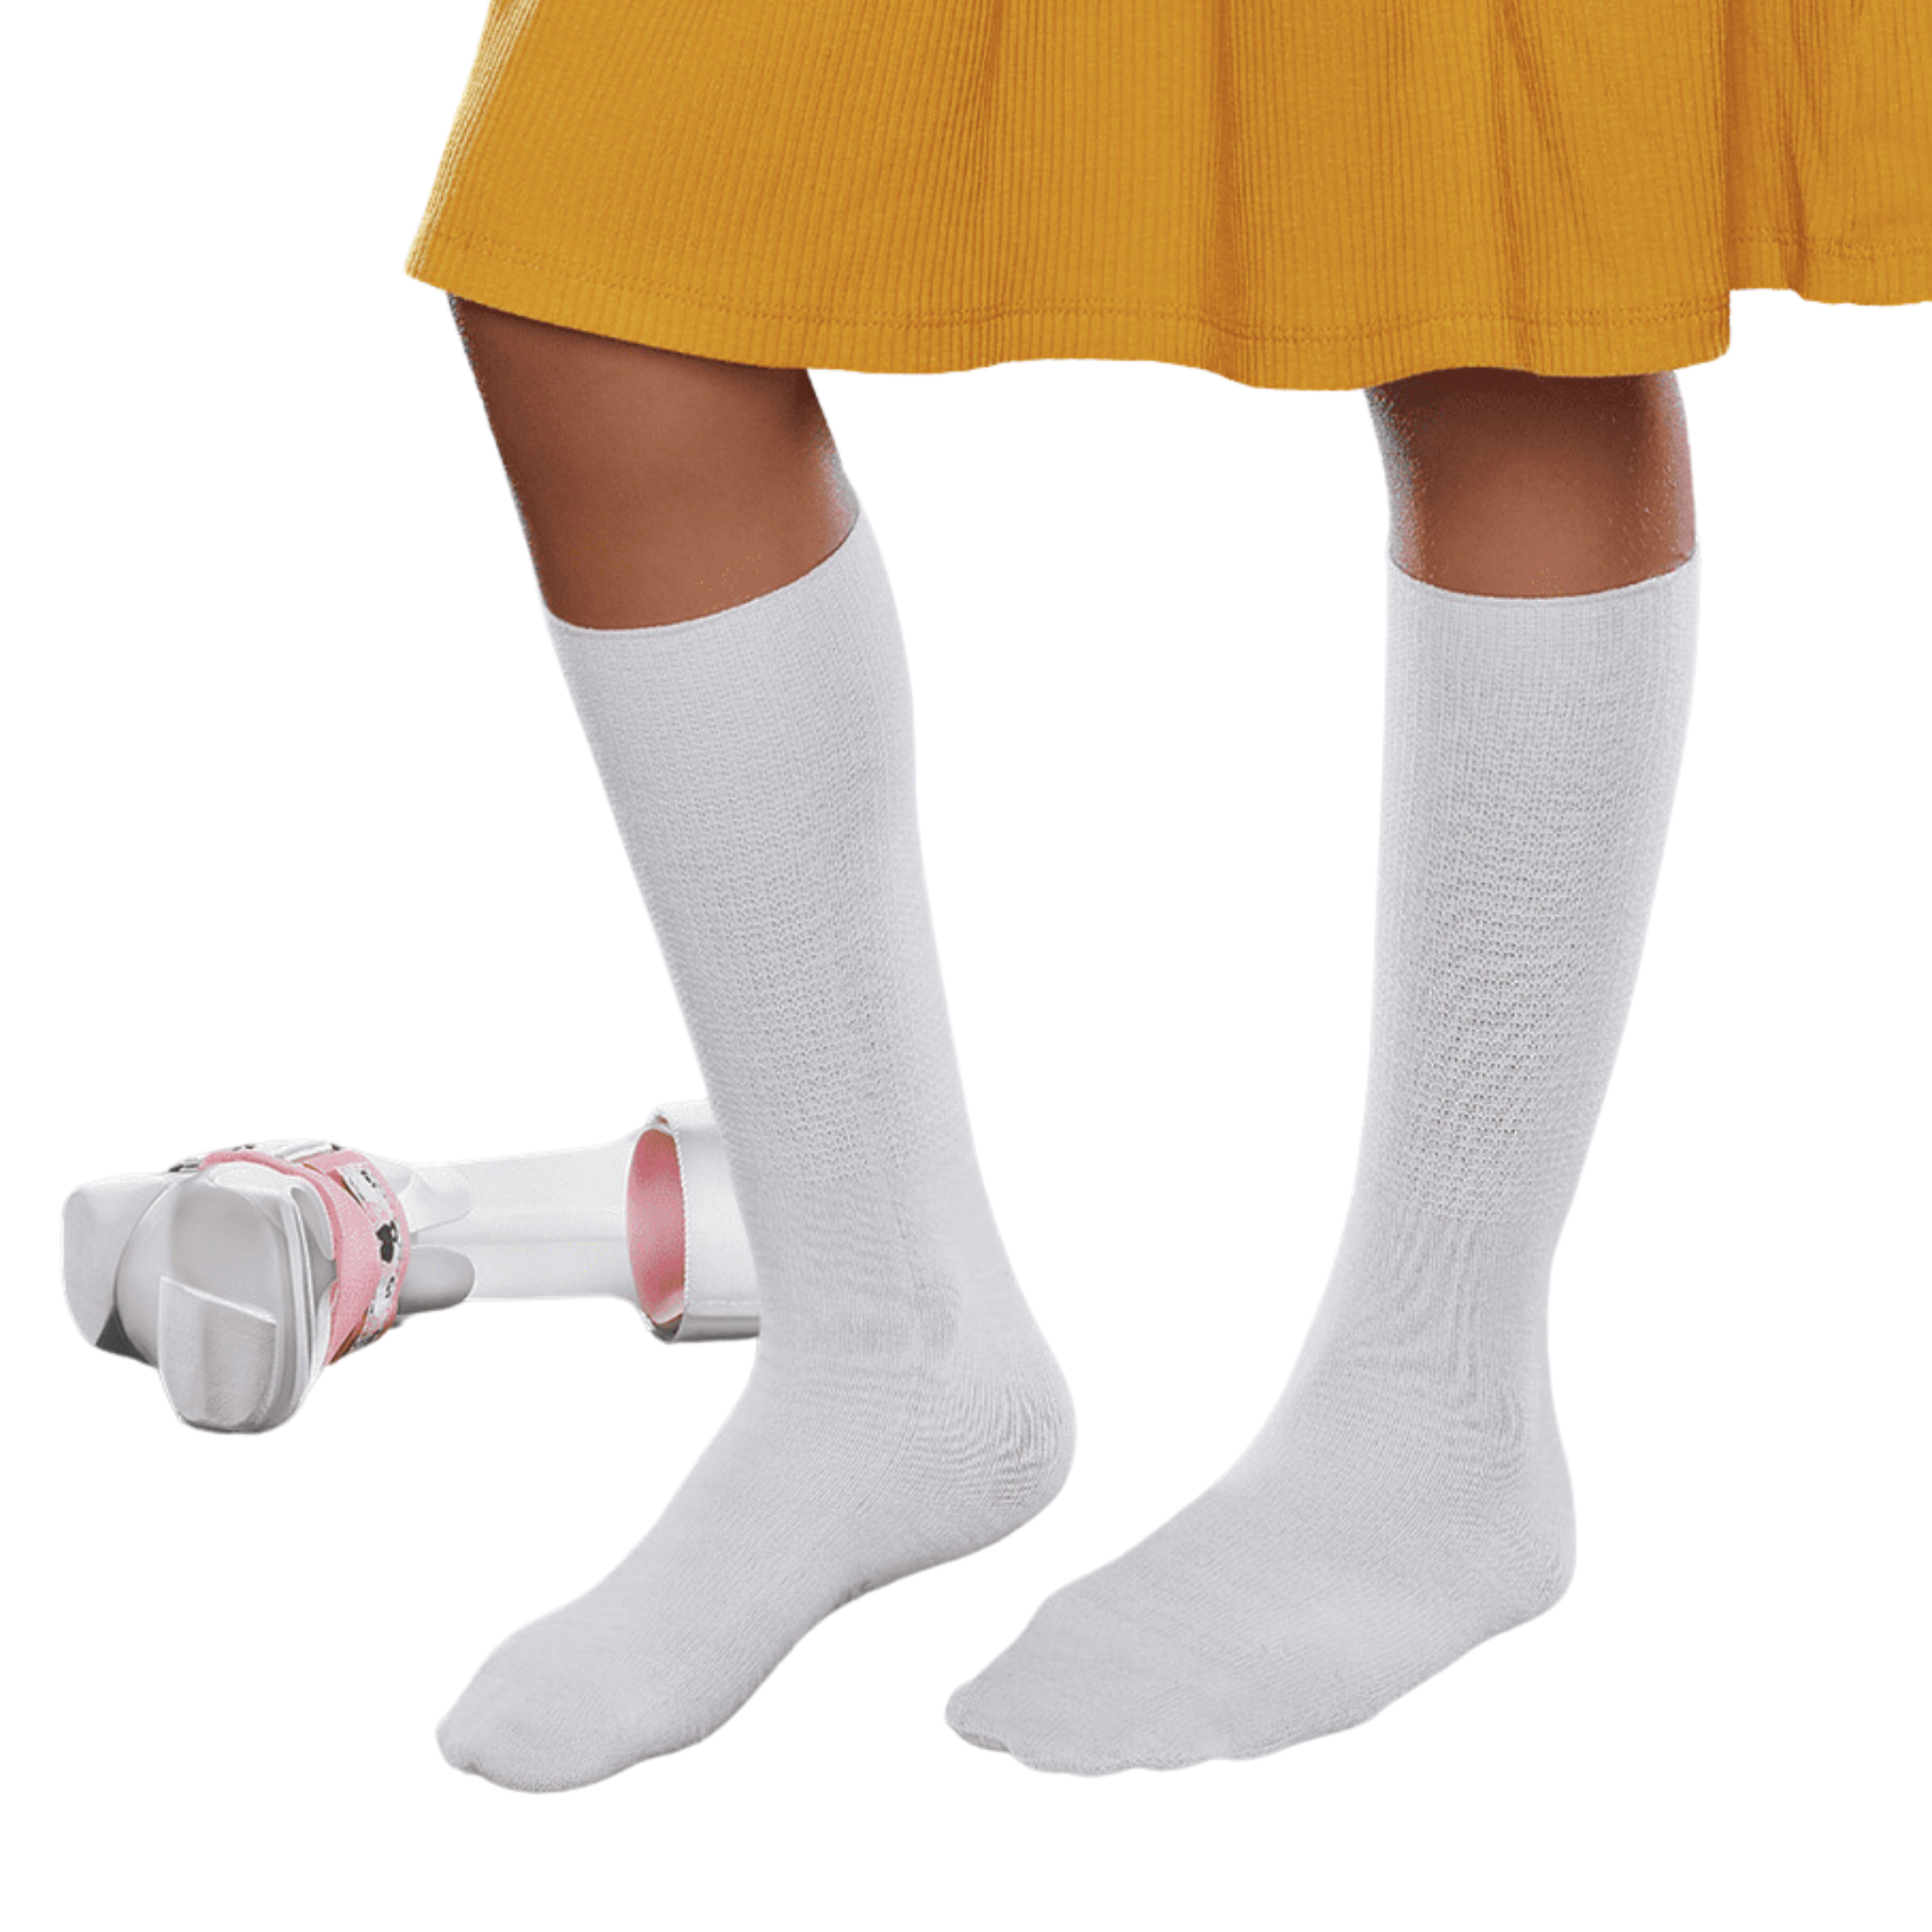 Knitrite - AFO (Ankle Foot Orthosis) Interface Seamless Socks for Children